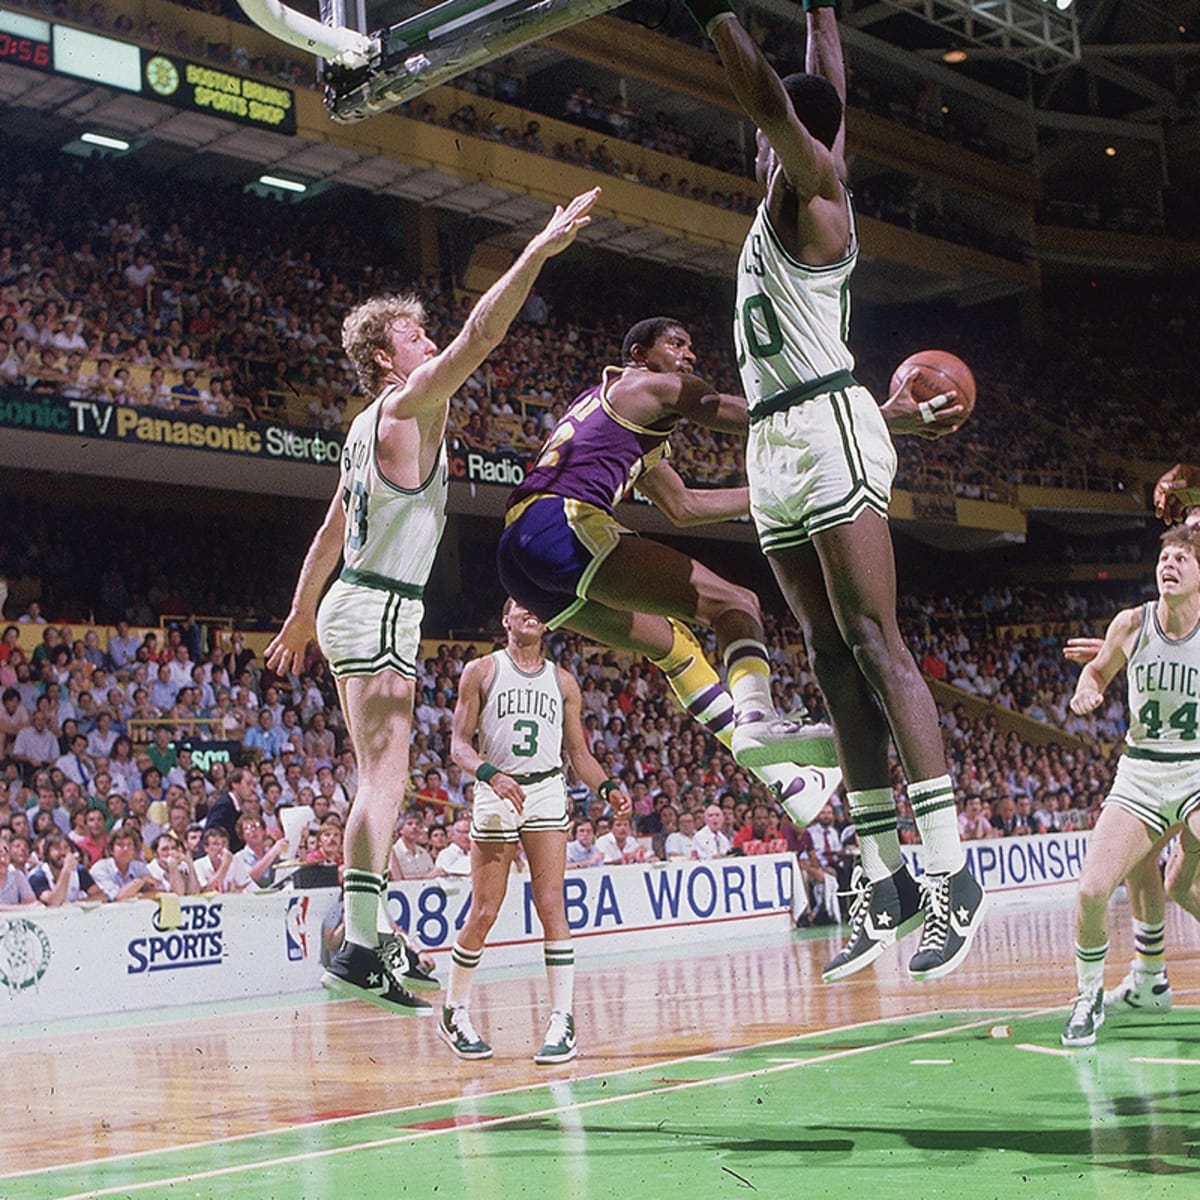 Larry Bird 1980 All-Star Game: 7 points, 7 assists, 6 rebounds, 3